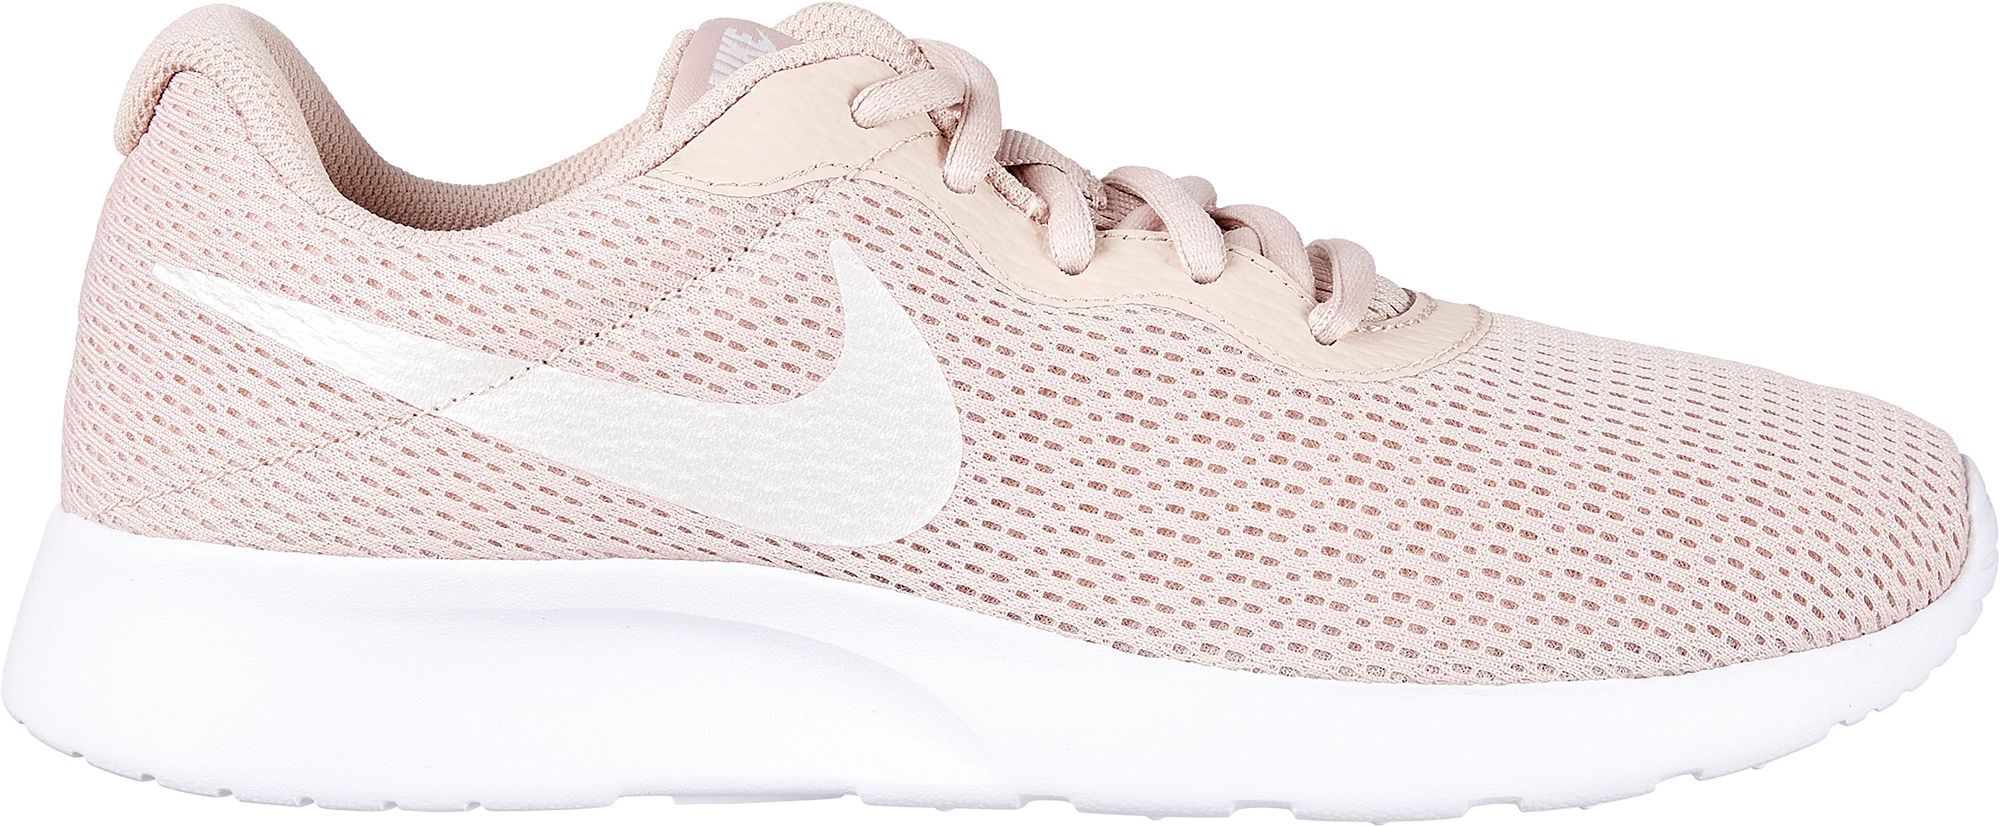 womens rose gold nike shoes